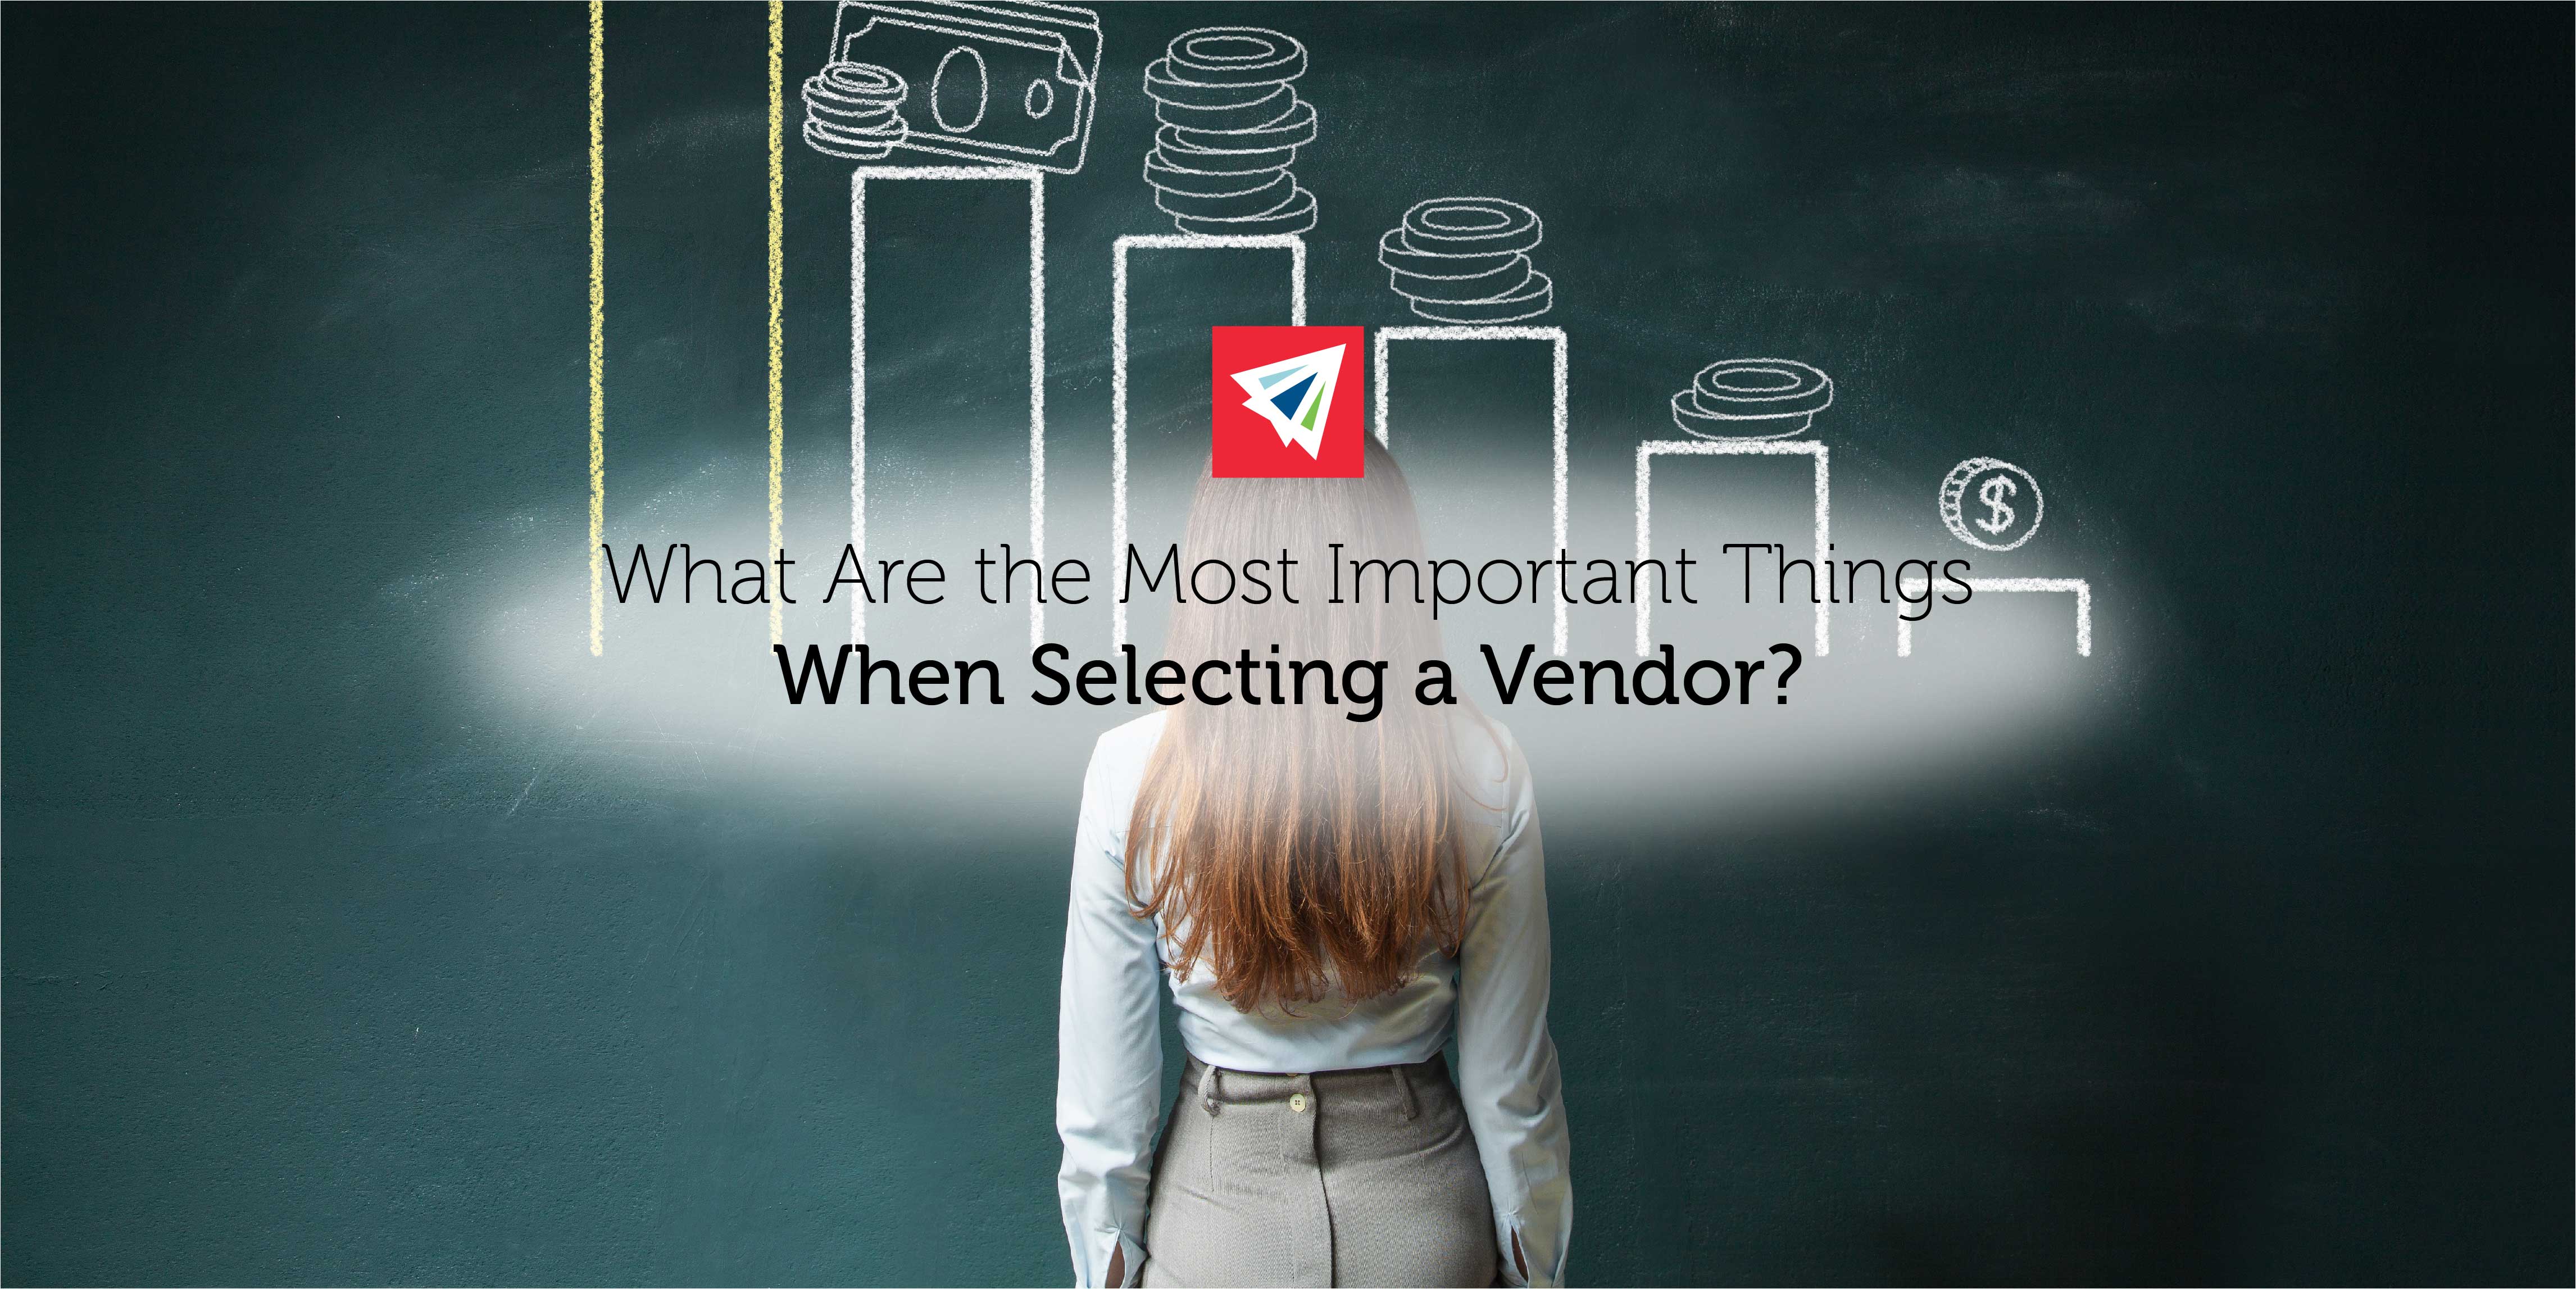 What Are the Most Important Things to You When Selecting a Vendor?